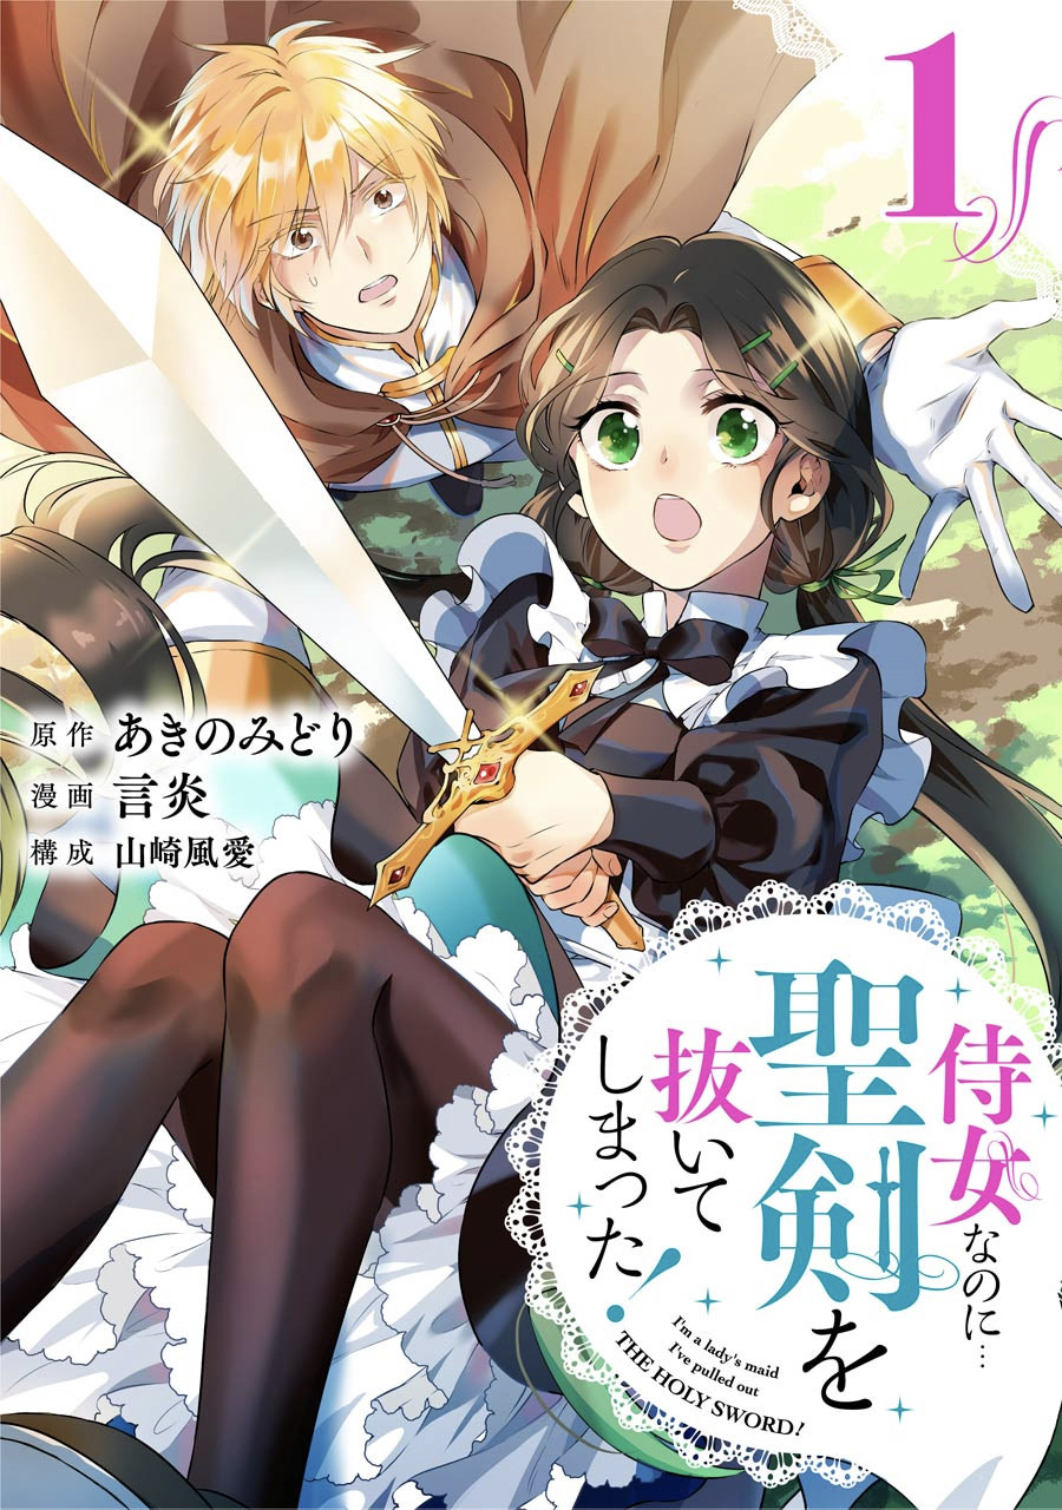 I'm a Lady's Maid, I've Pulled Out THE HOLY SWORD! Vol. 1 Ch. 1 Cancel the Birth of a Hero